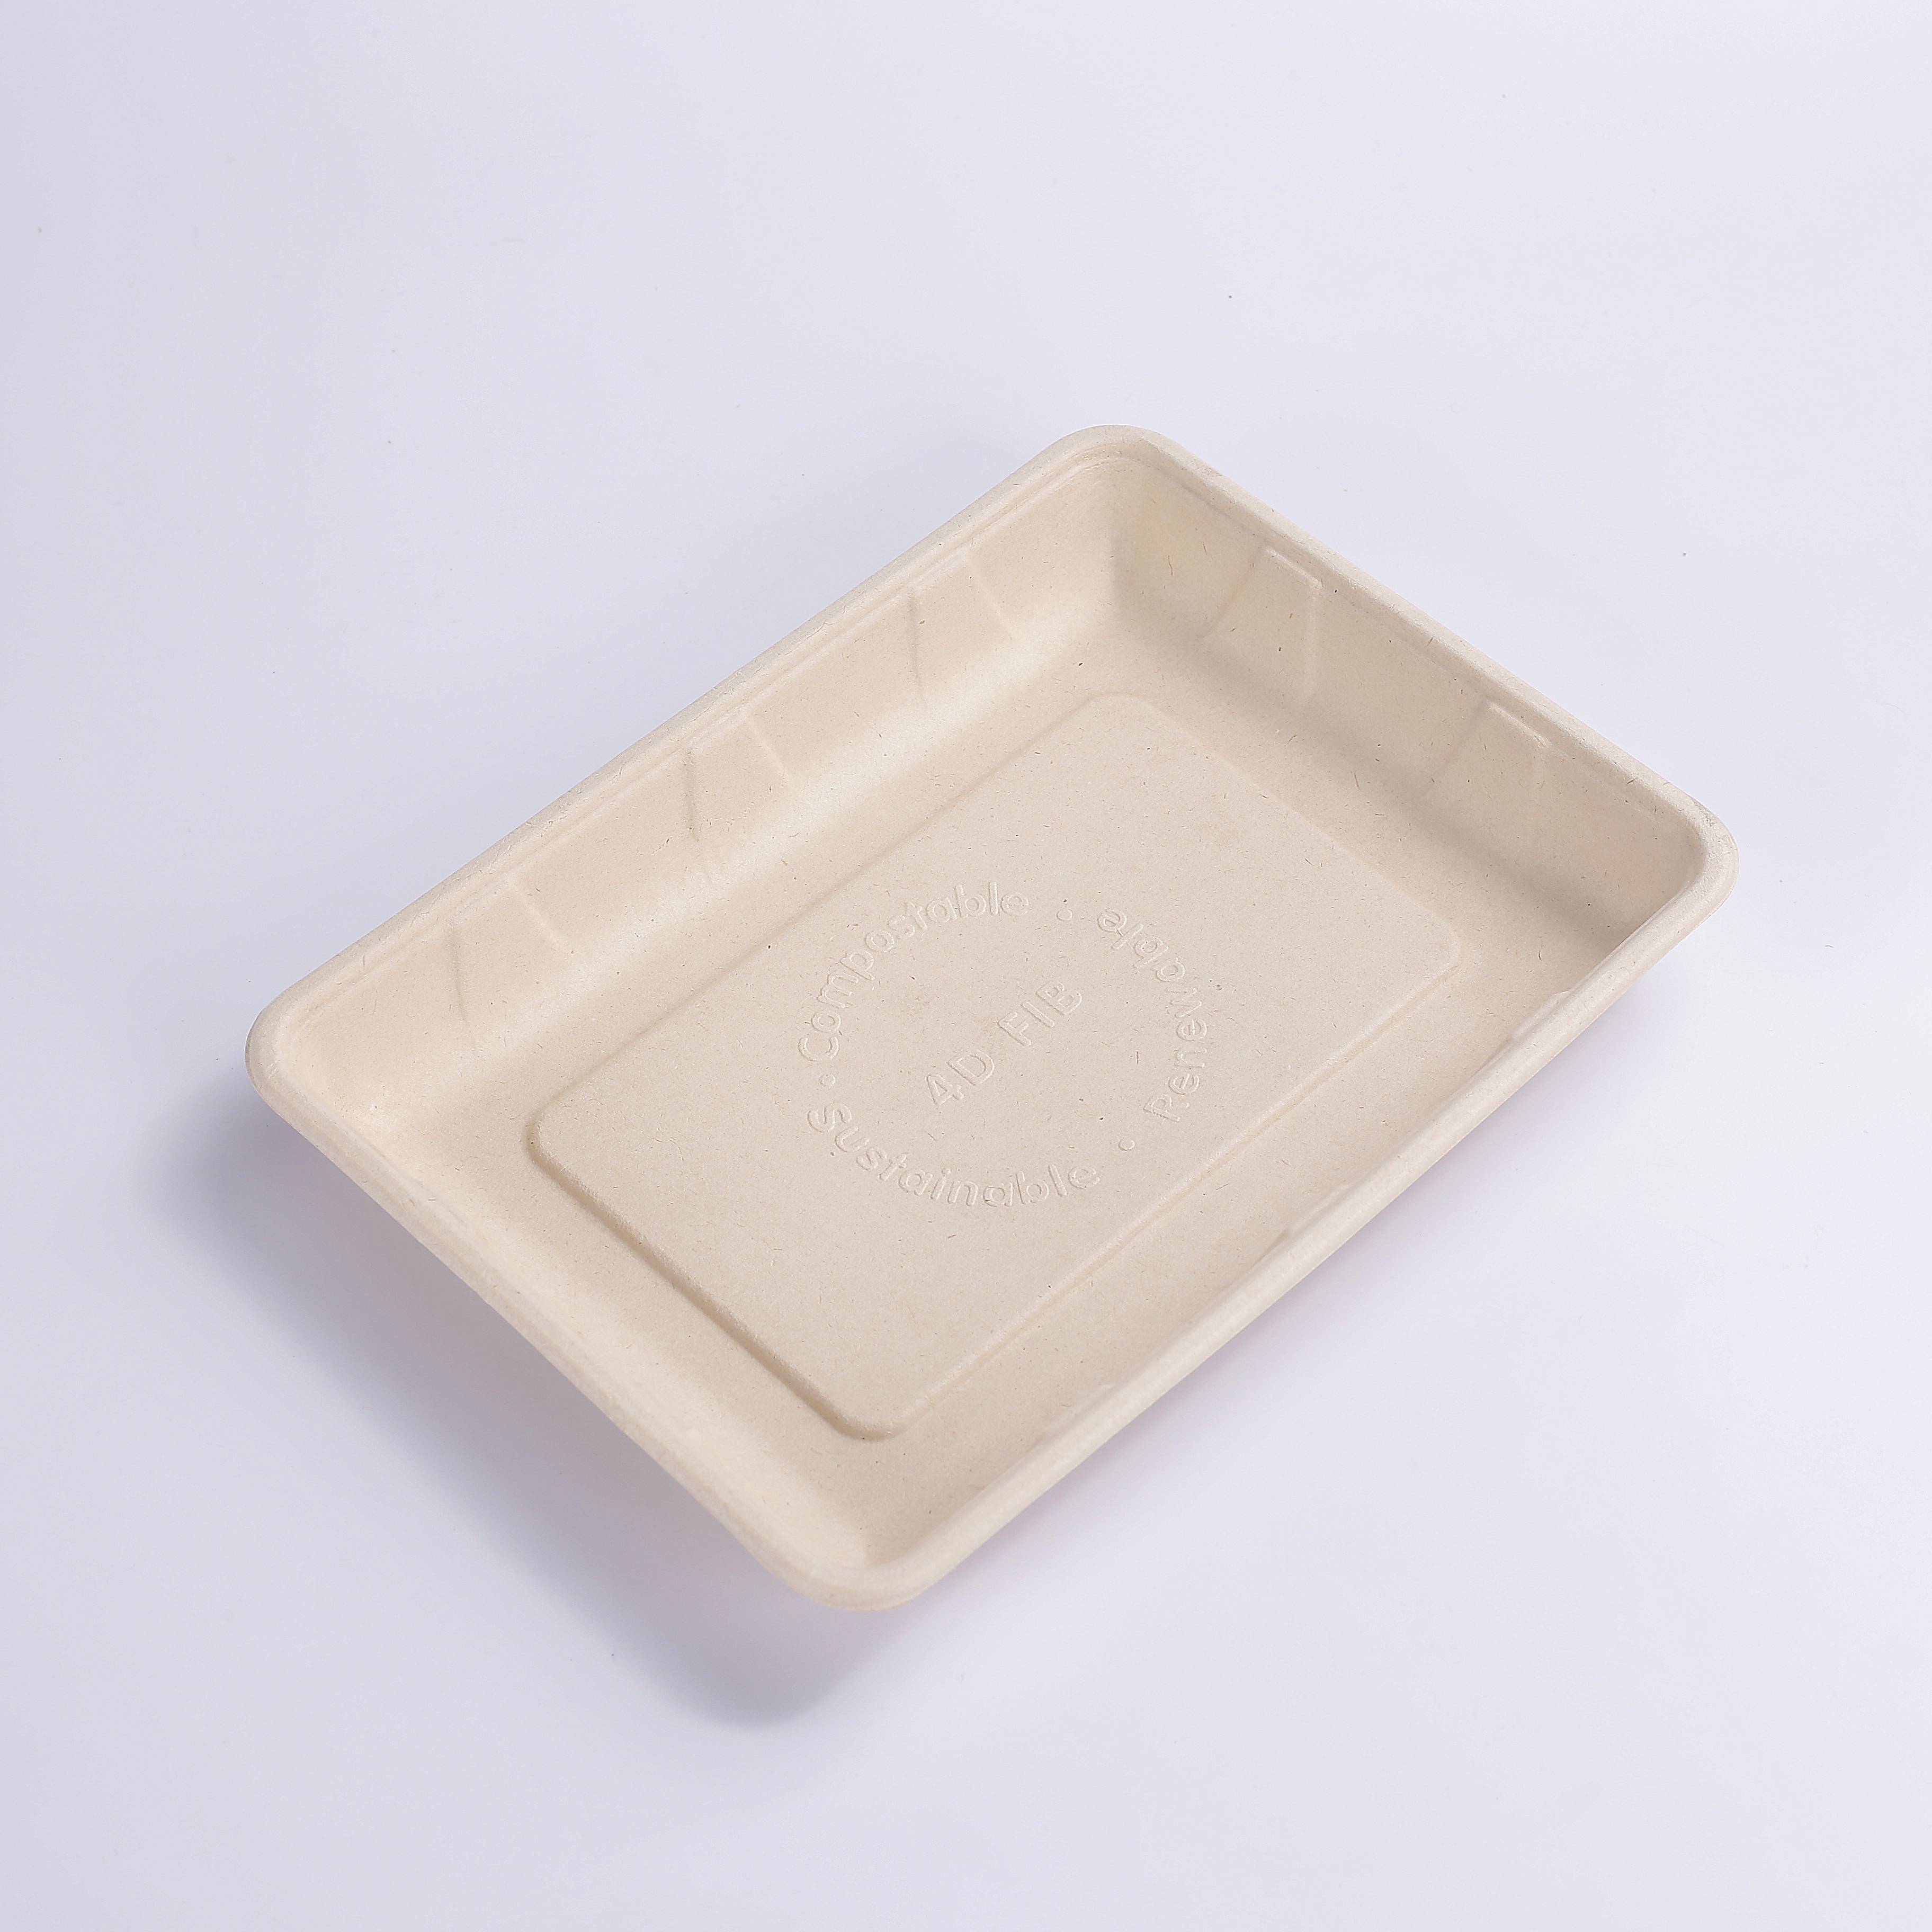 Factory wholesale Compostable Food Tray Compartments - 9.5*7 INCH Compostable Heavy-Duty Disposable Food BBQ Fruit Tray, Microwave Paper Plates Waterproof and Oil-Proof Heavy Duty Trays, 100% Biod...